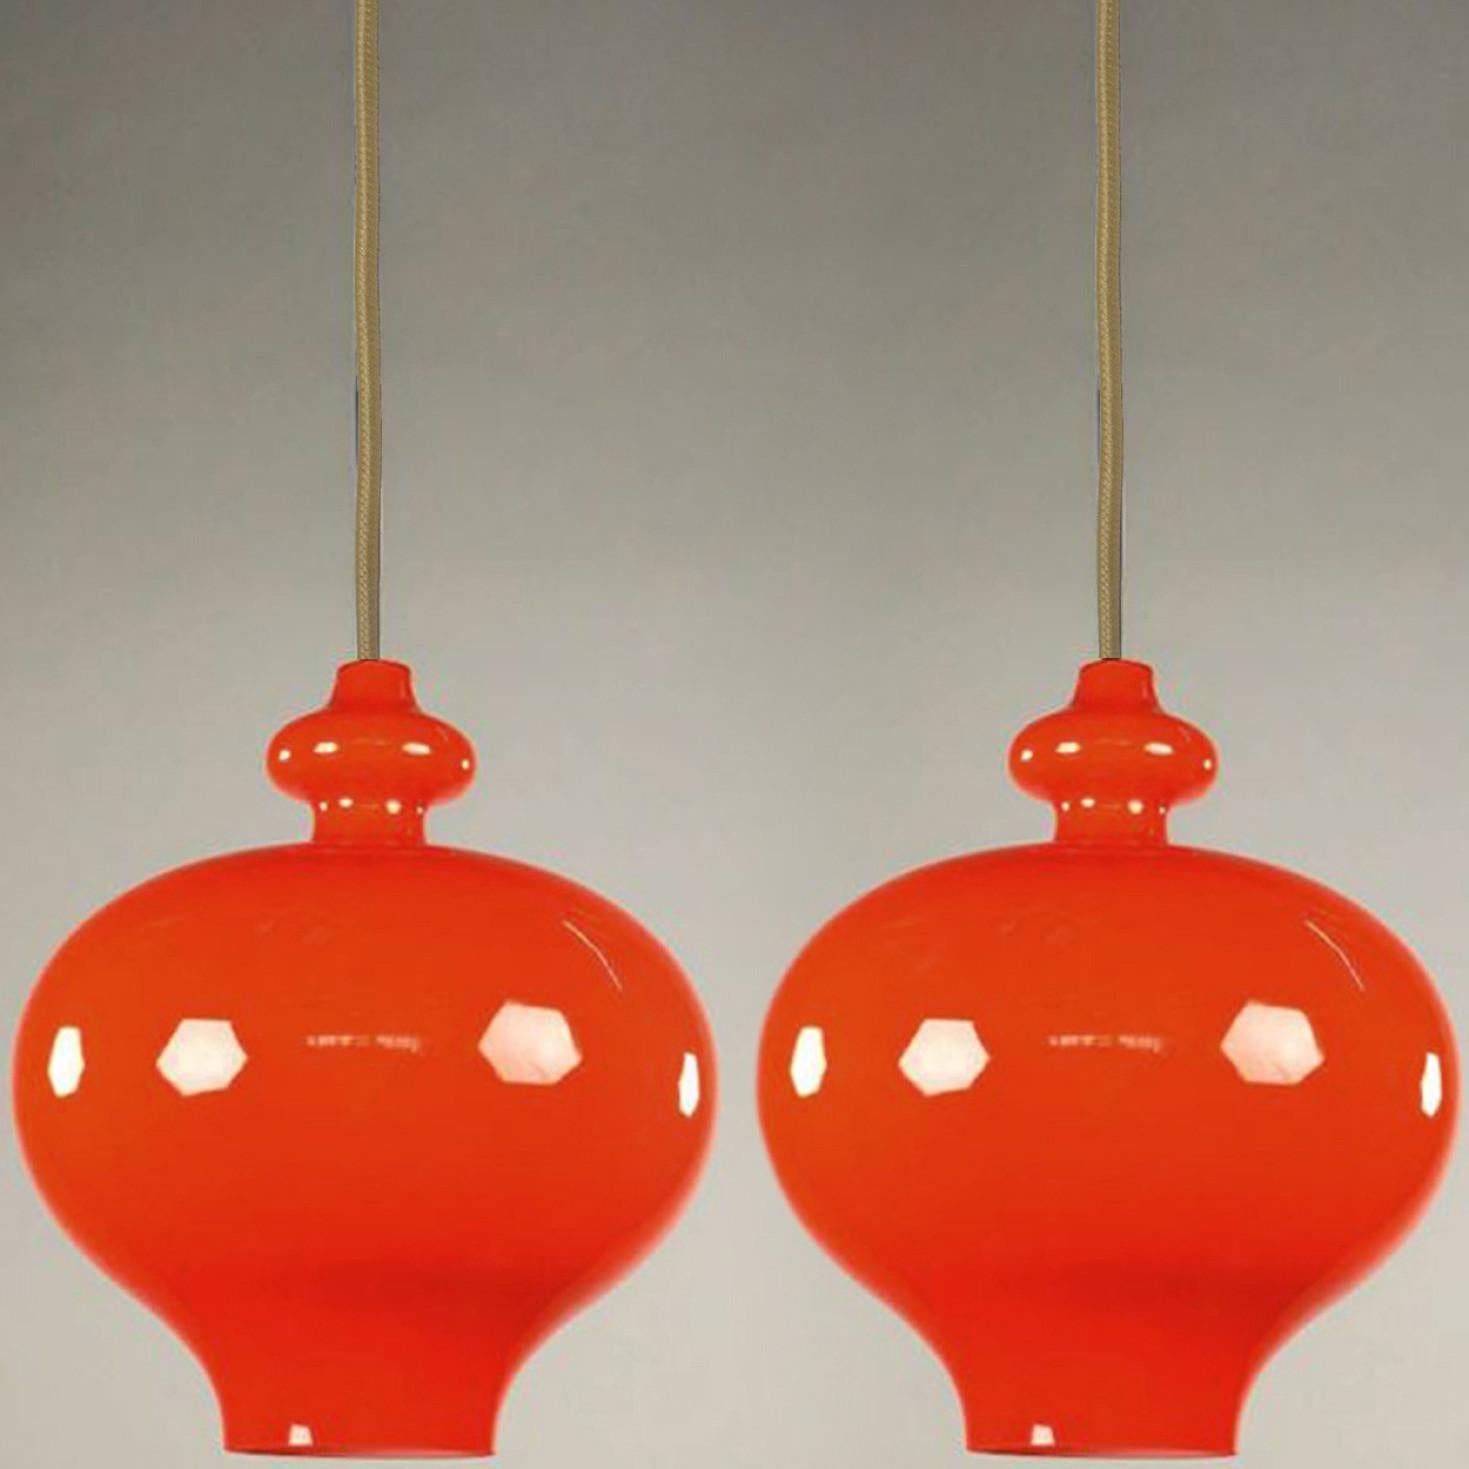 Modernist pendant lamp in orange-colored opaline glass. Designed by Hans-Agne Jakobsson for Staff Leuchten, Germany, mid 1960s.

Please notice the price is for the pair. We can deliver different canopy's and length or colors of